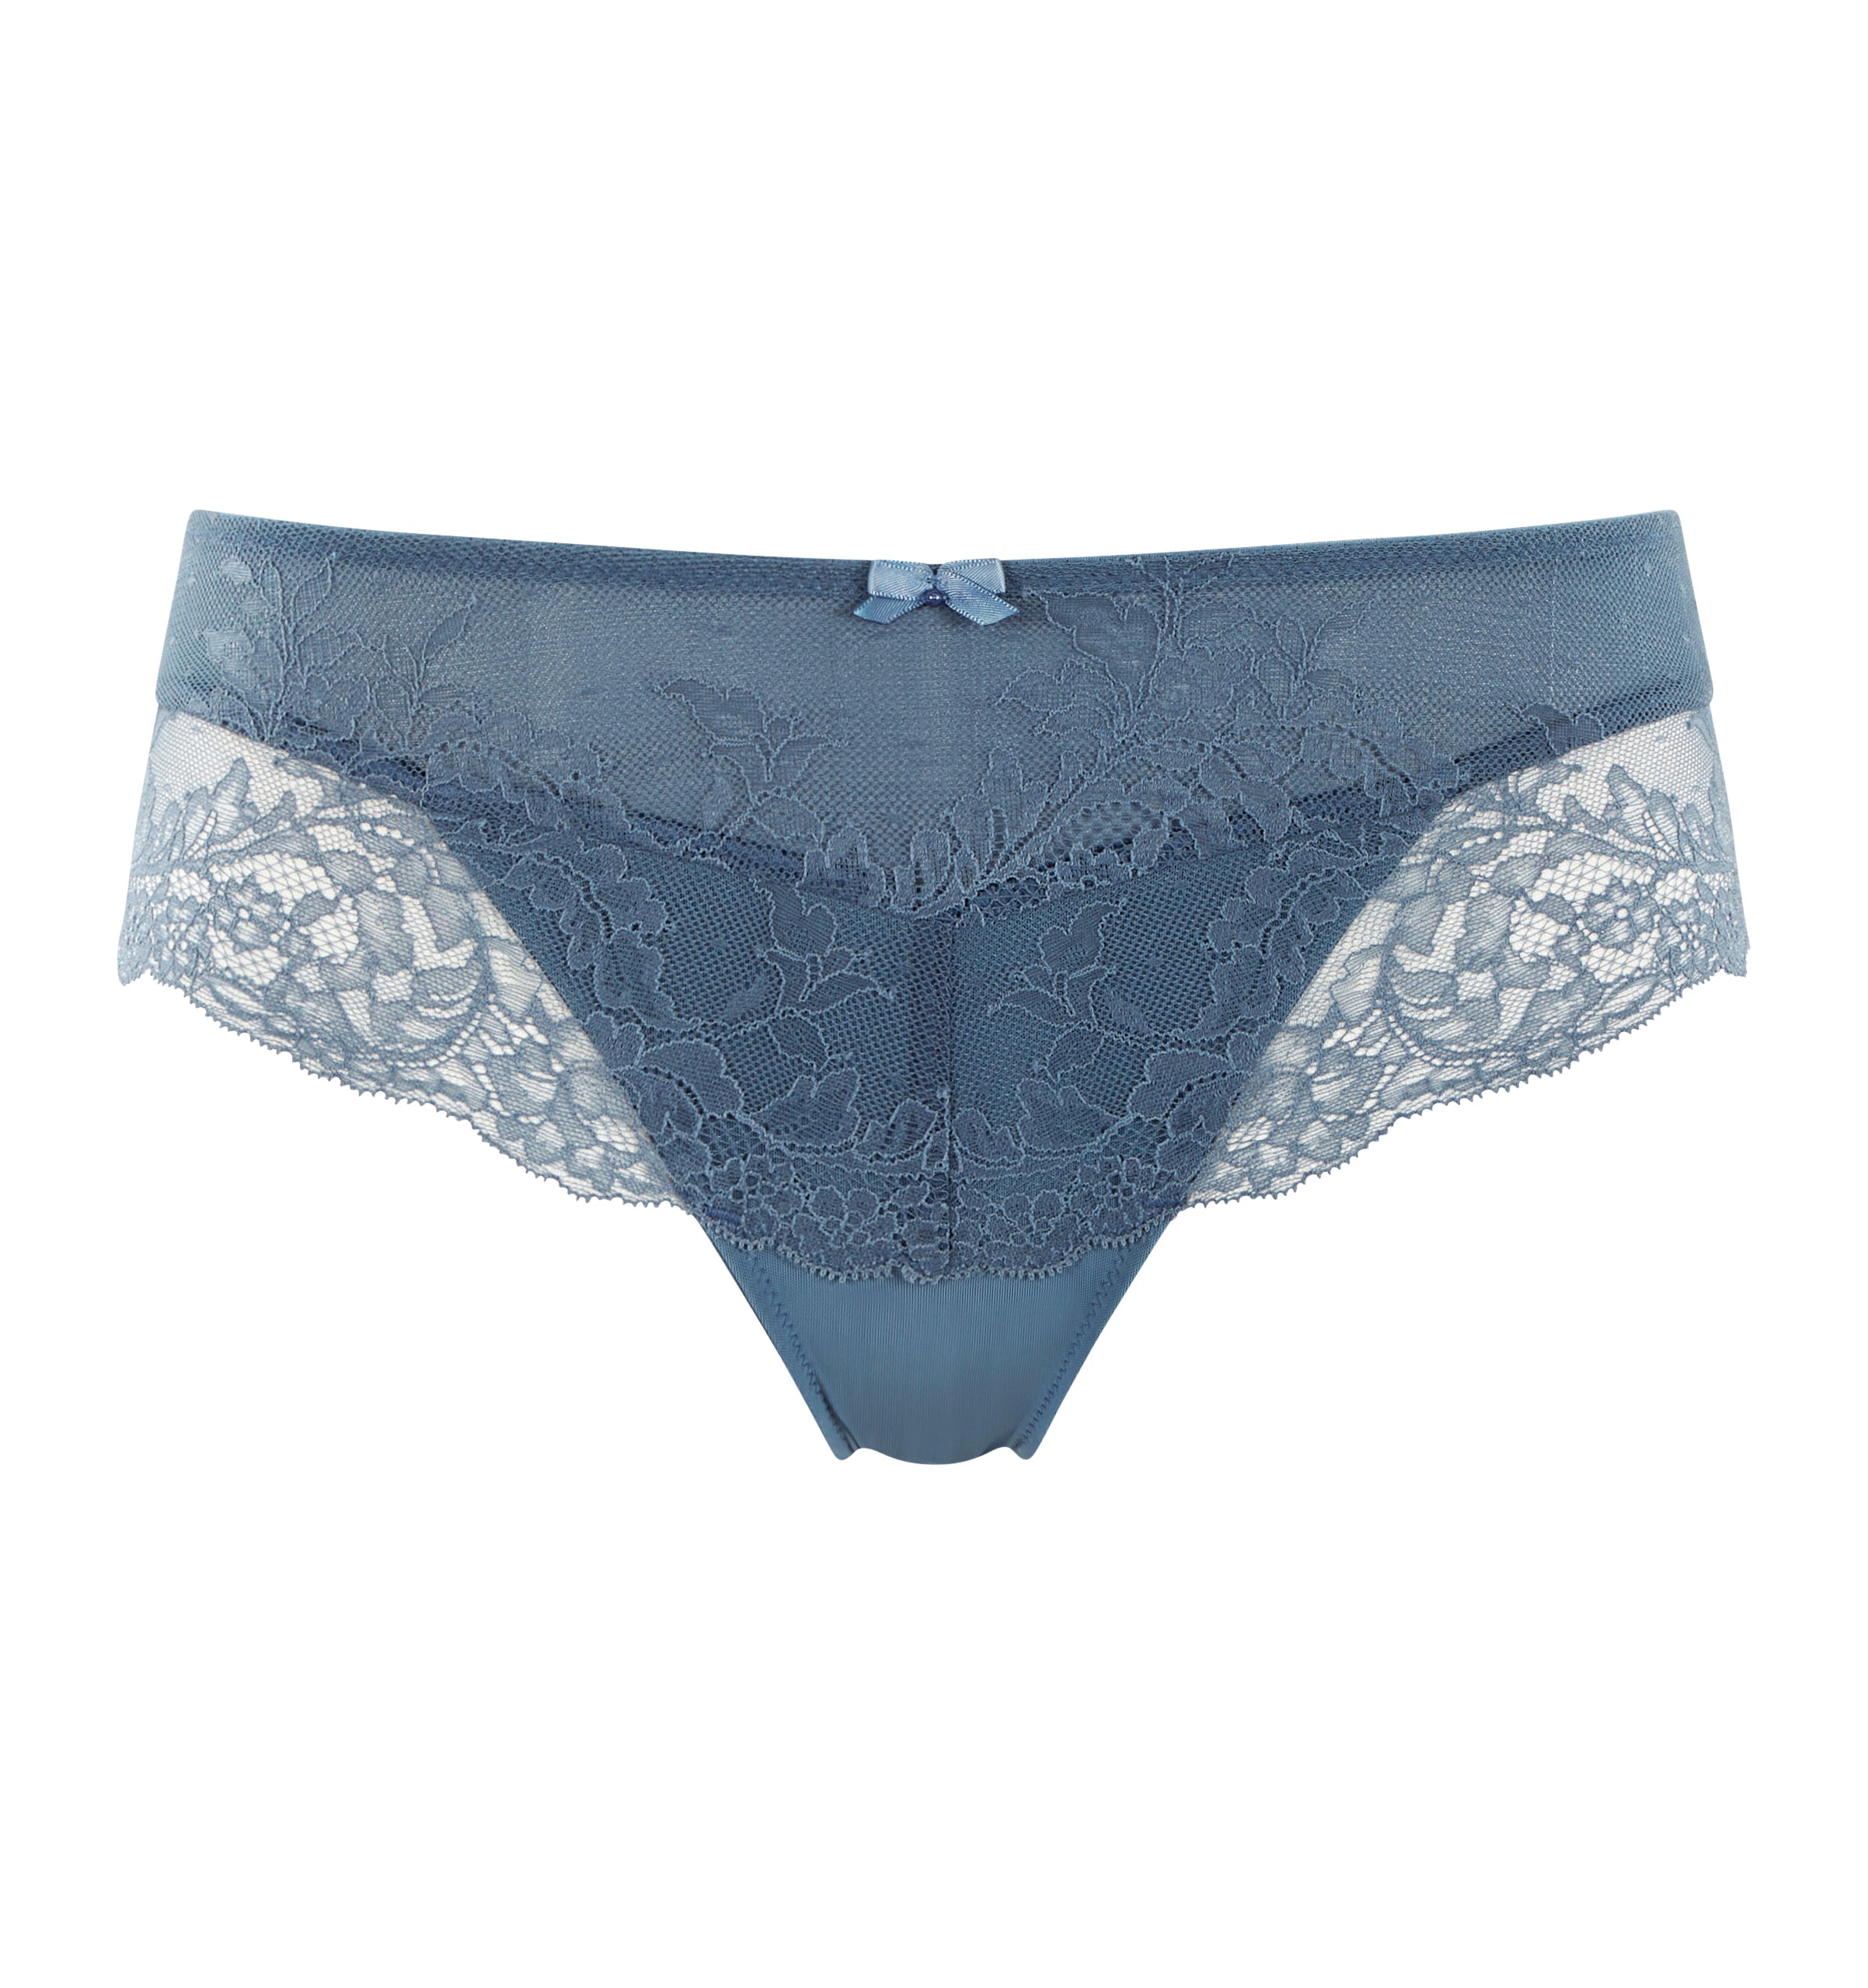 Lace seam-free brief [Periwinkle] – The Pantry Underwear